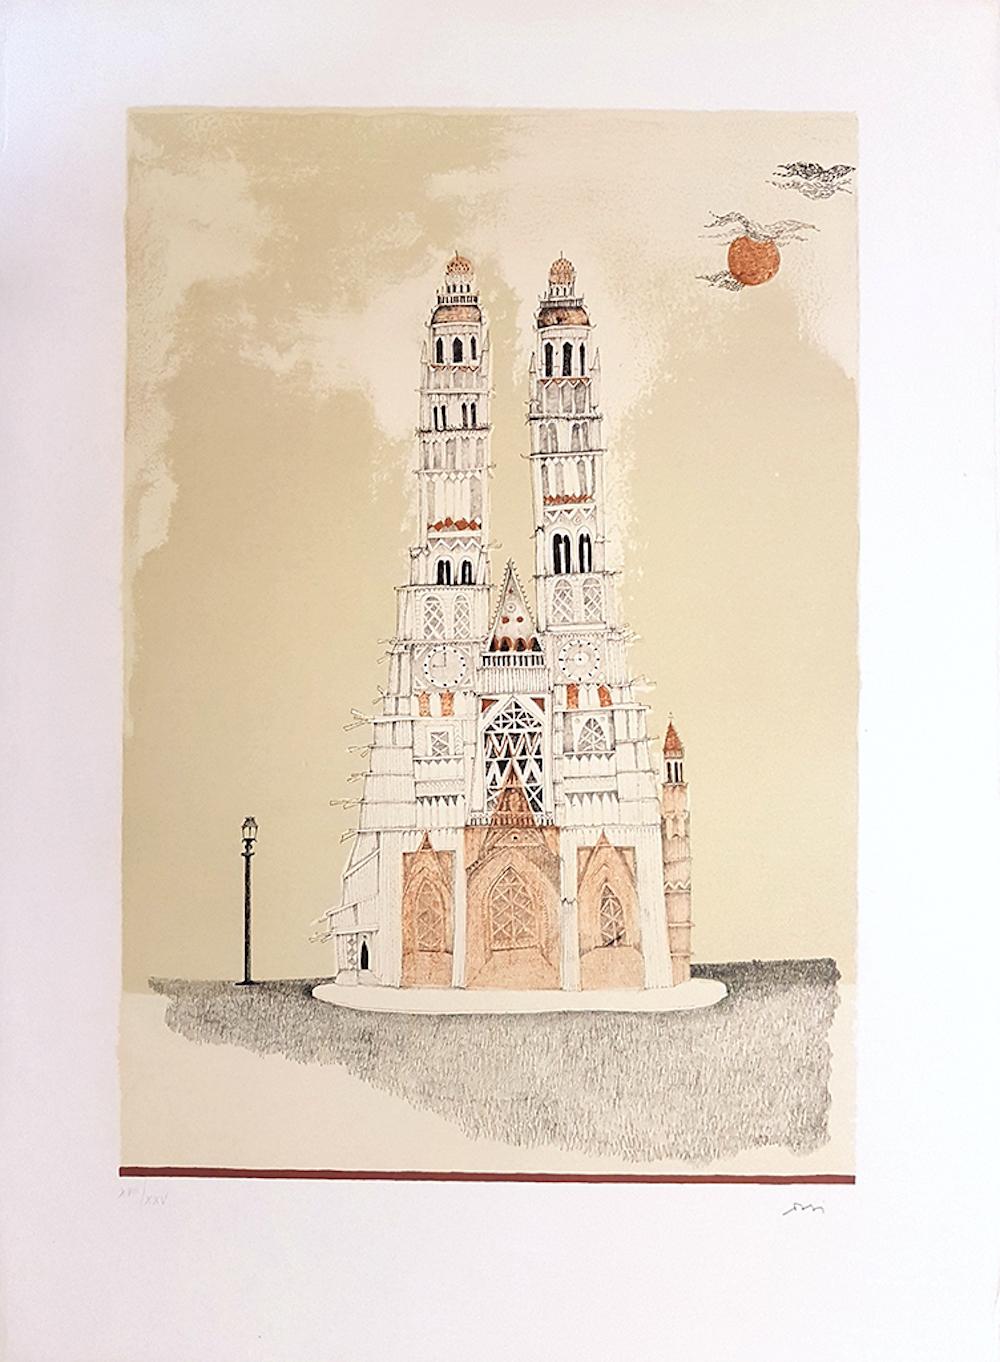 Cathedral of Dignes - Original Lithograph by Ossi Czinner - 1970s